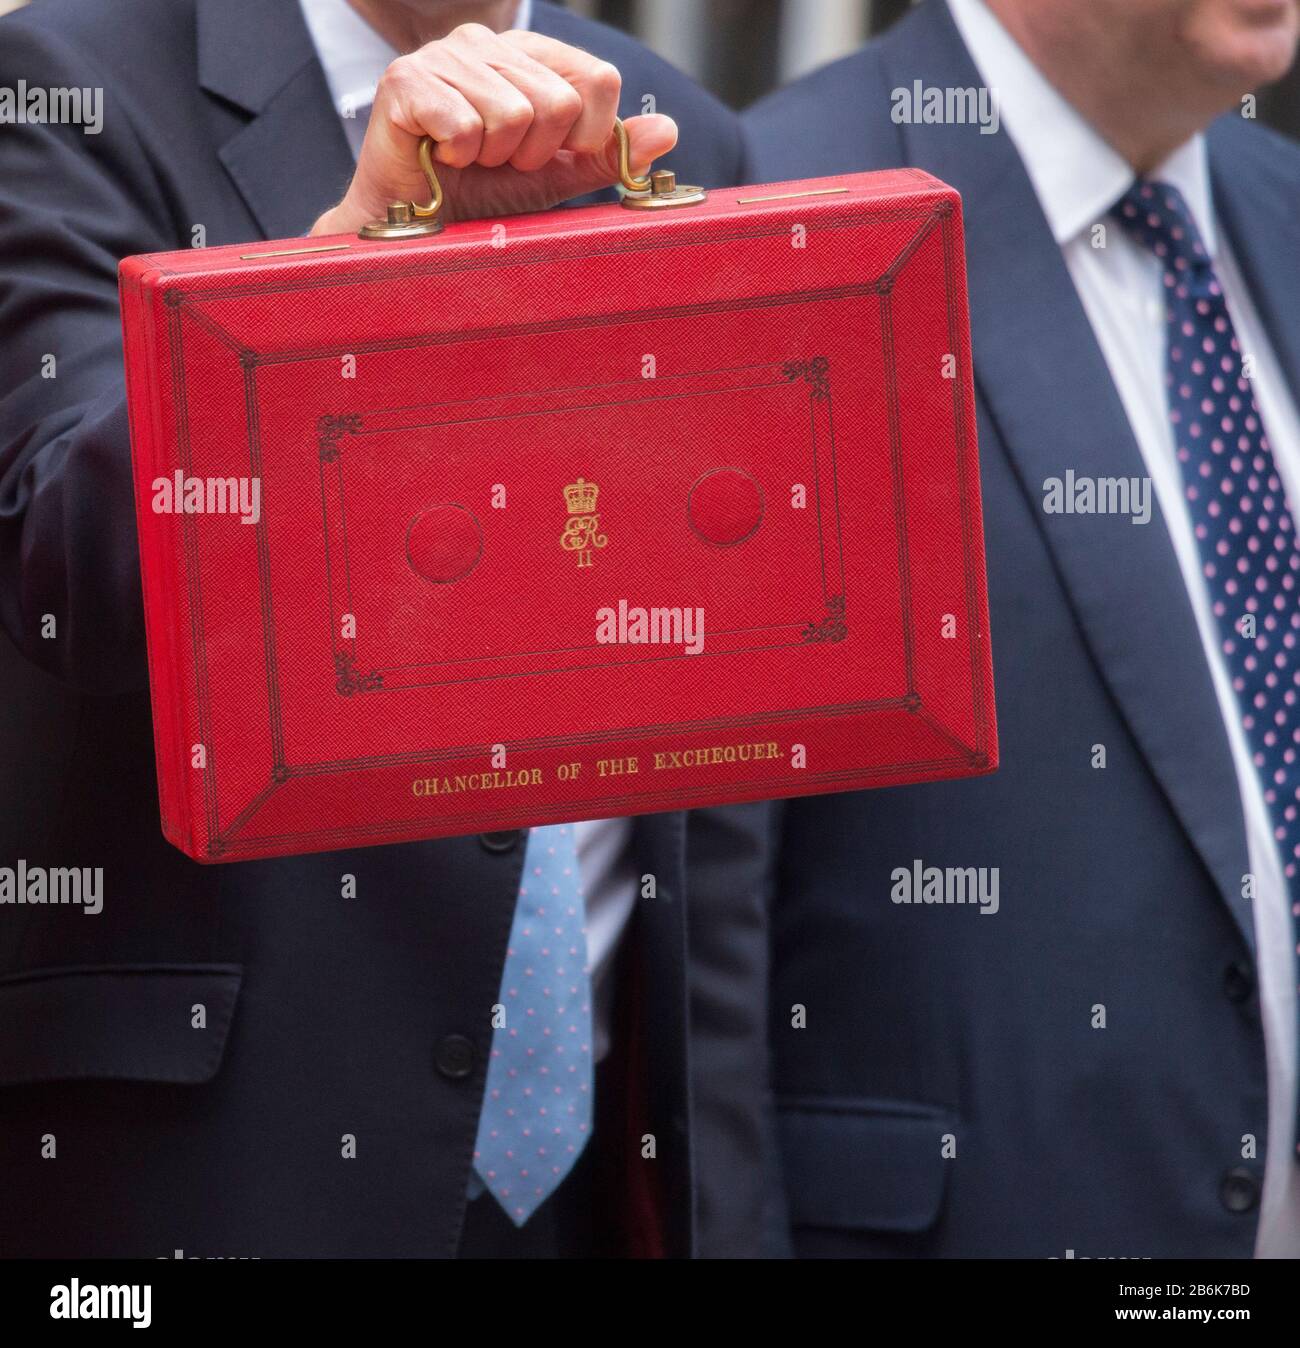 29th October 2018, London, UK. The Chancellor of the Exchequer stands outside 11 Downing Street presenting his red case to the assembled media. Stock Photo